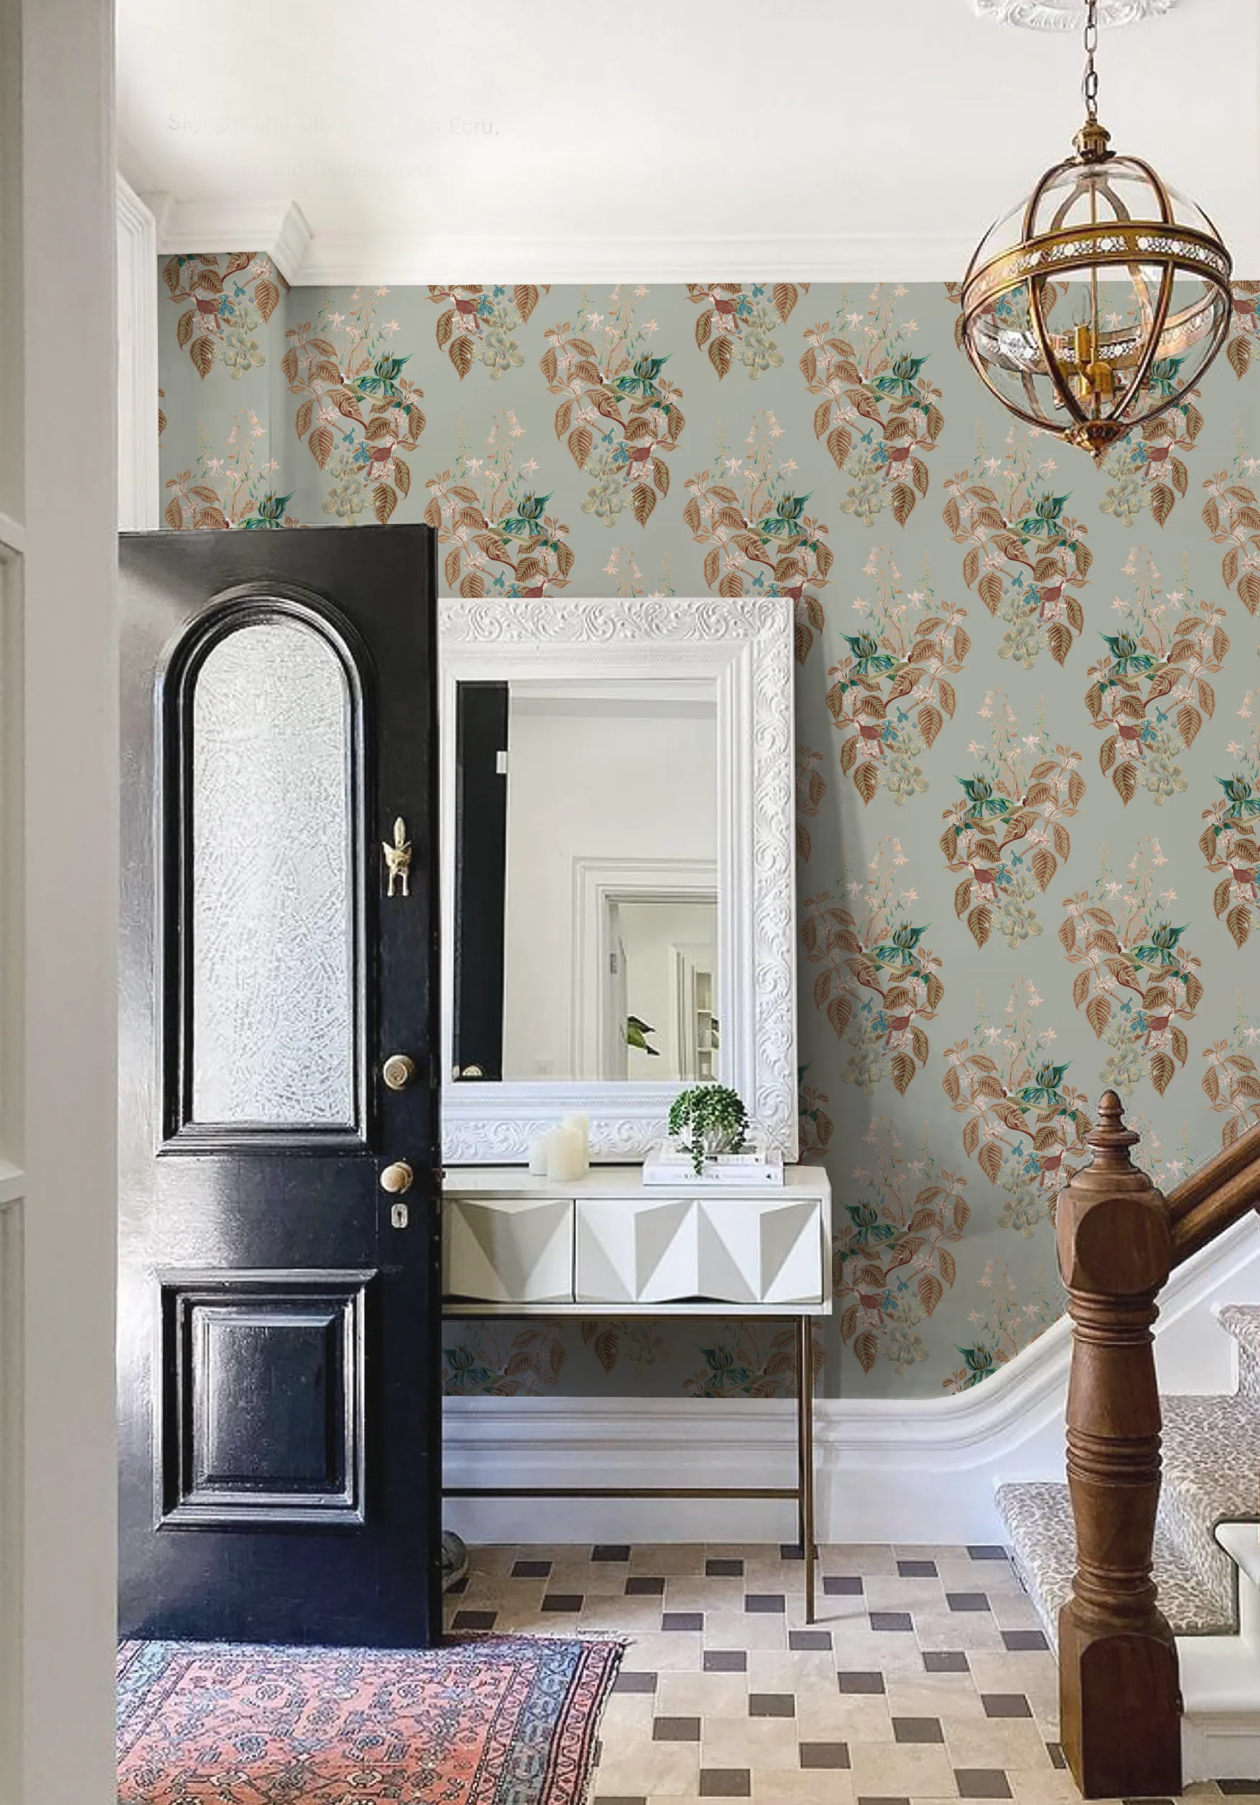 A hallway with Aviary Isle Wallpaper from Deus ex Gardenia in Skylight blue, with a mirror, and a door. Photo by Readmore House Interiors.